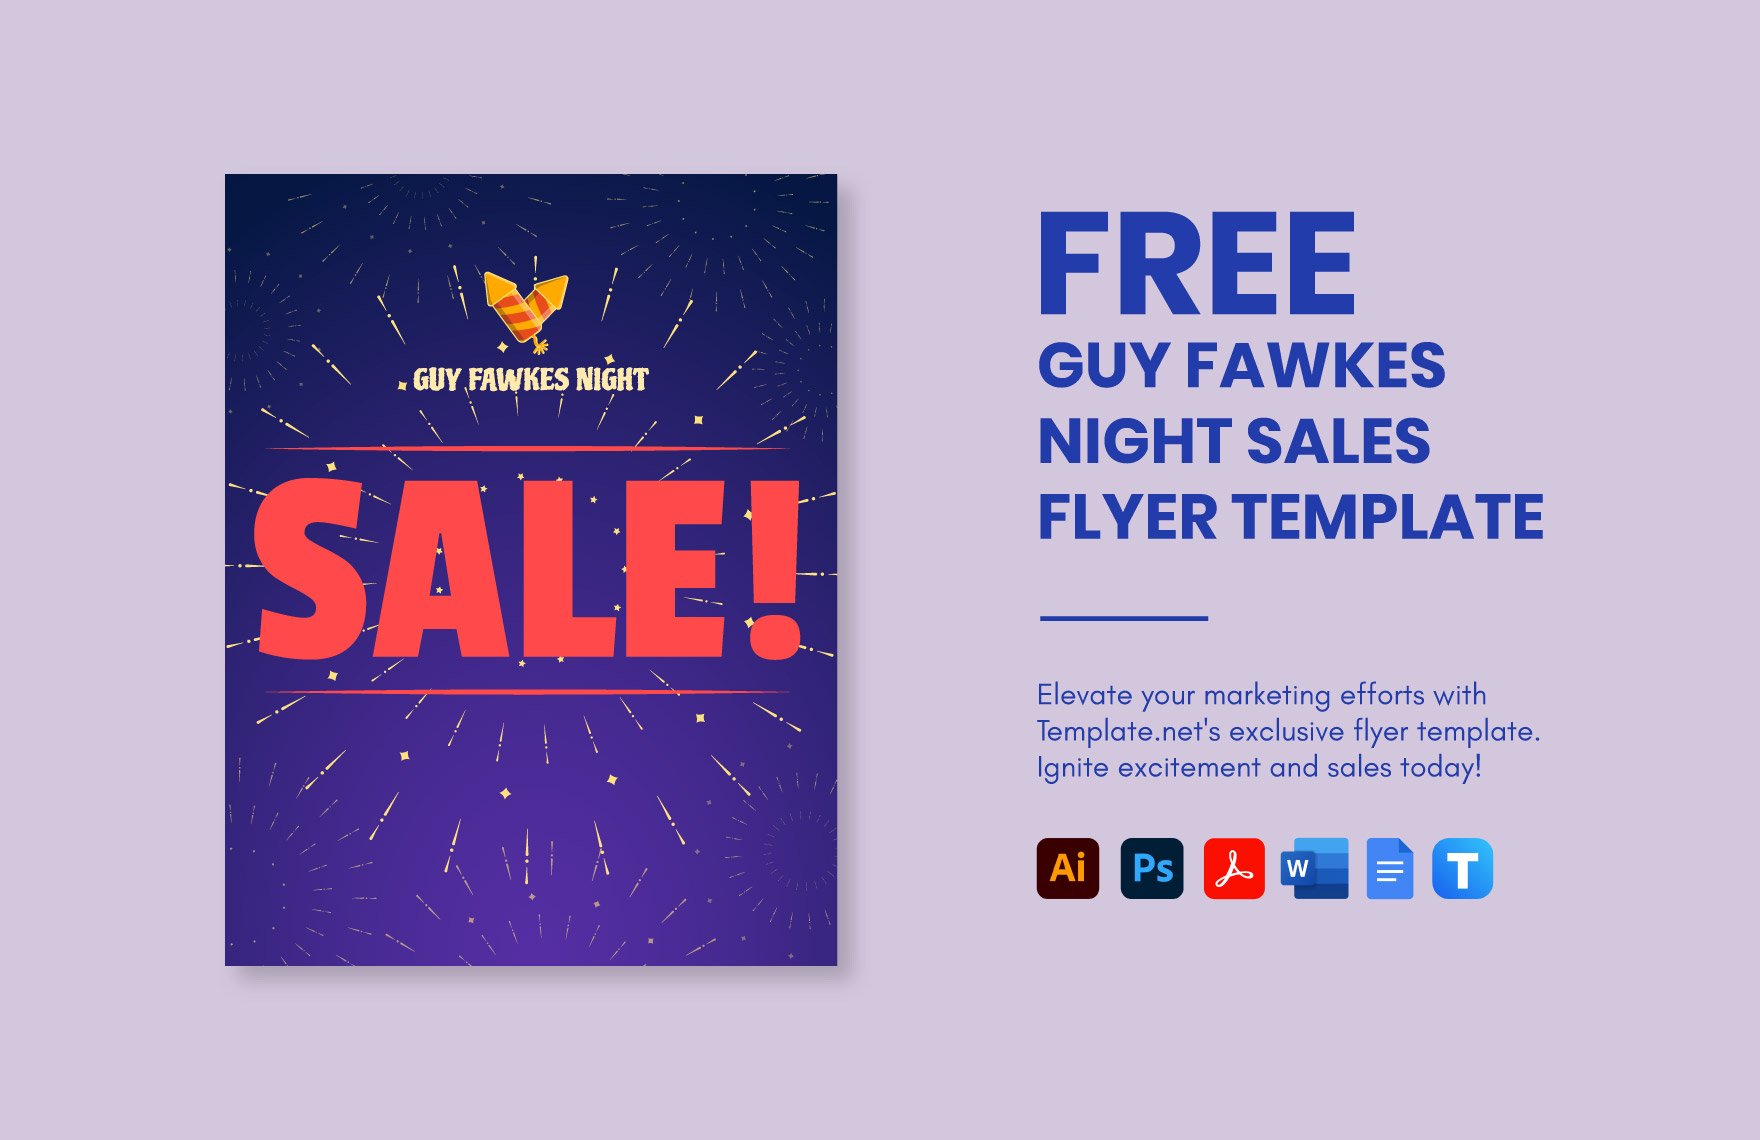 Free Guy Fawkes Night Sales Flyer Template in Word, Google Docs, PDF, Illustrator, PSD